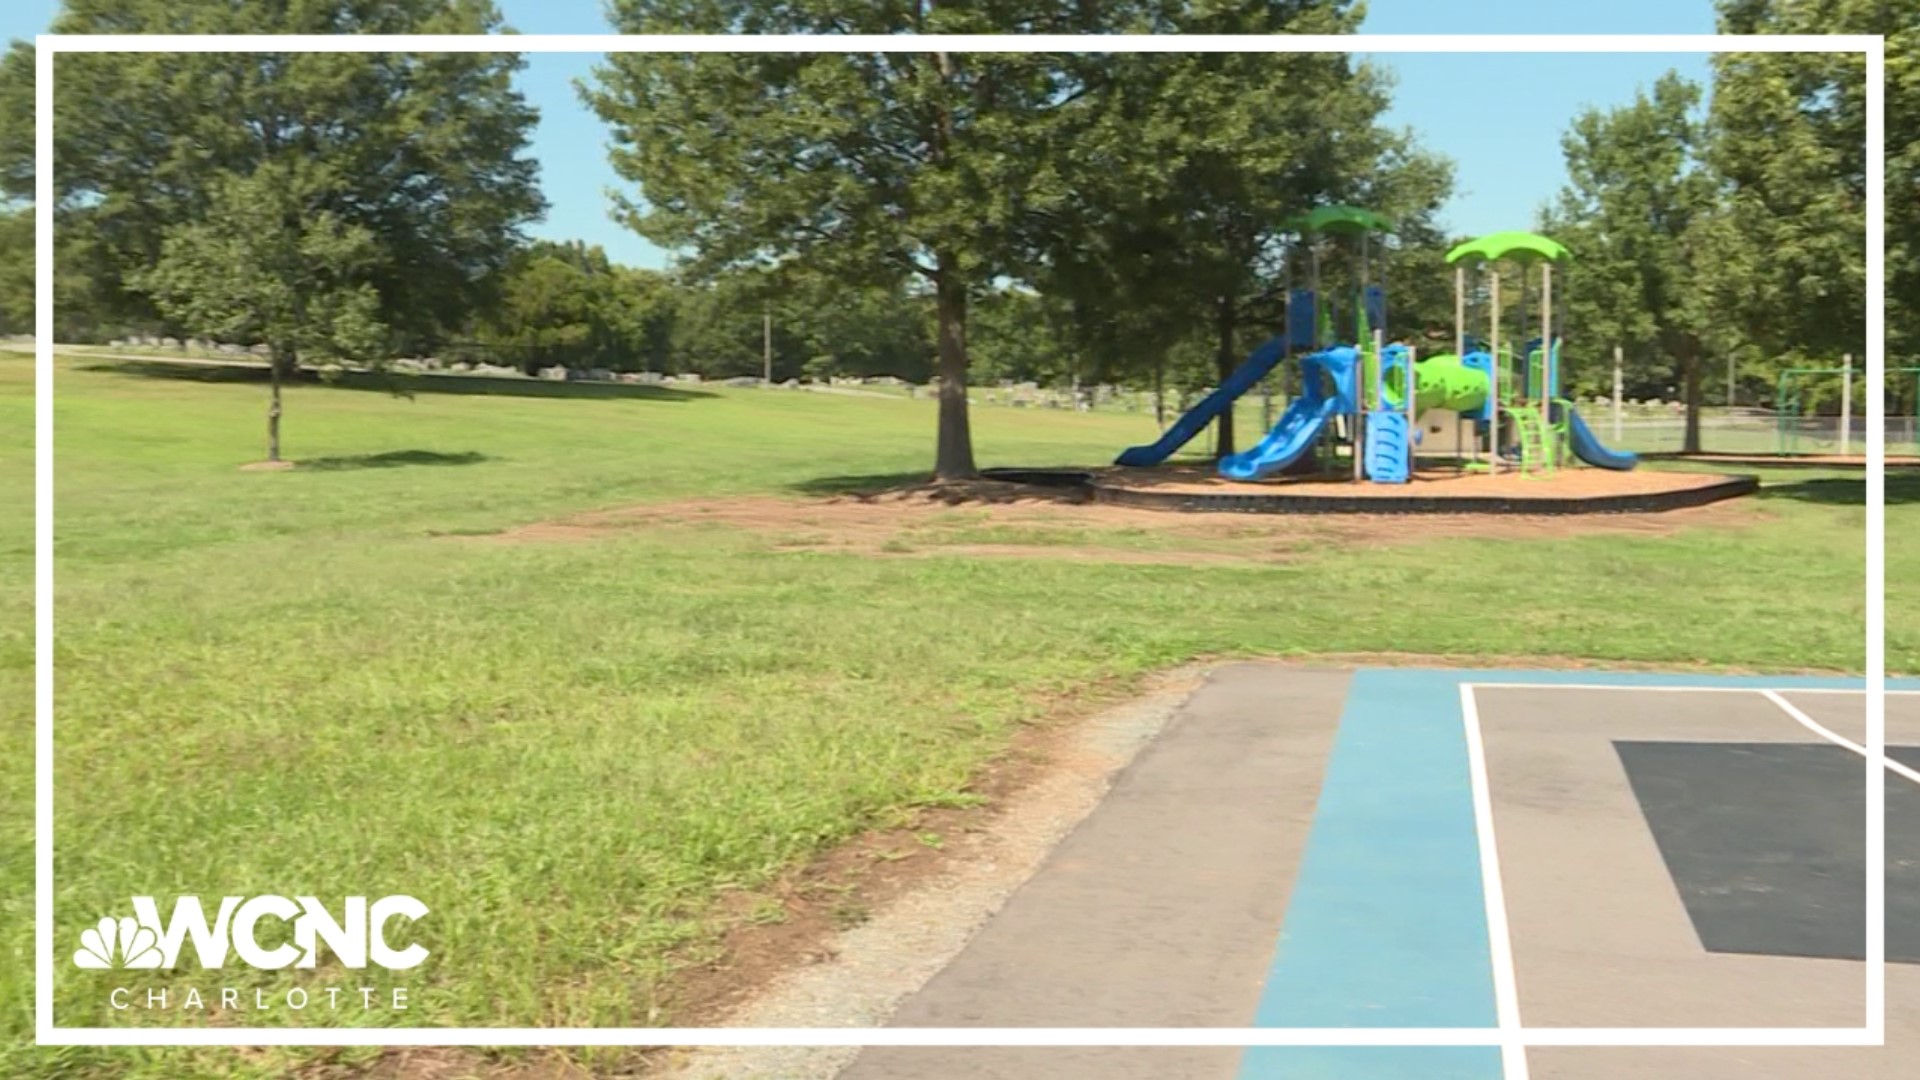 The city of Monroe is planning for a major park overhaul.